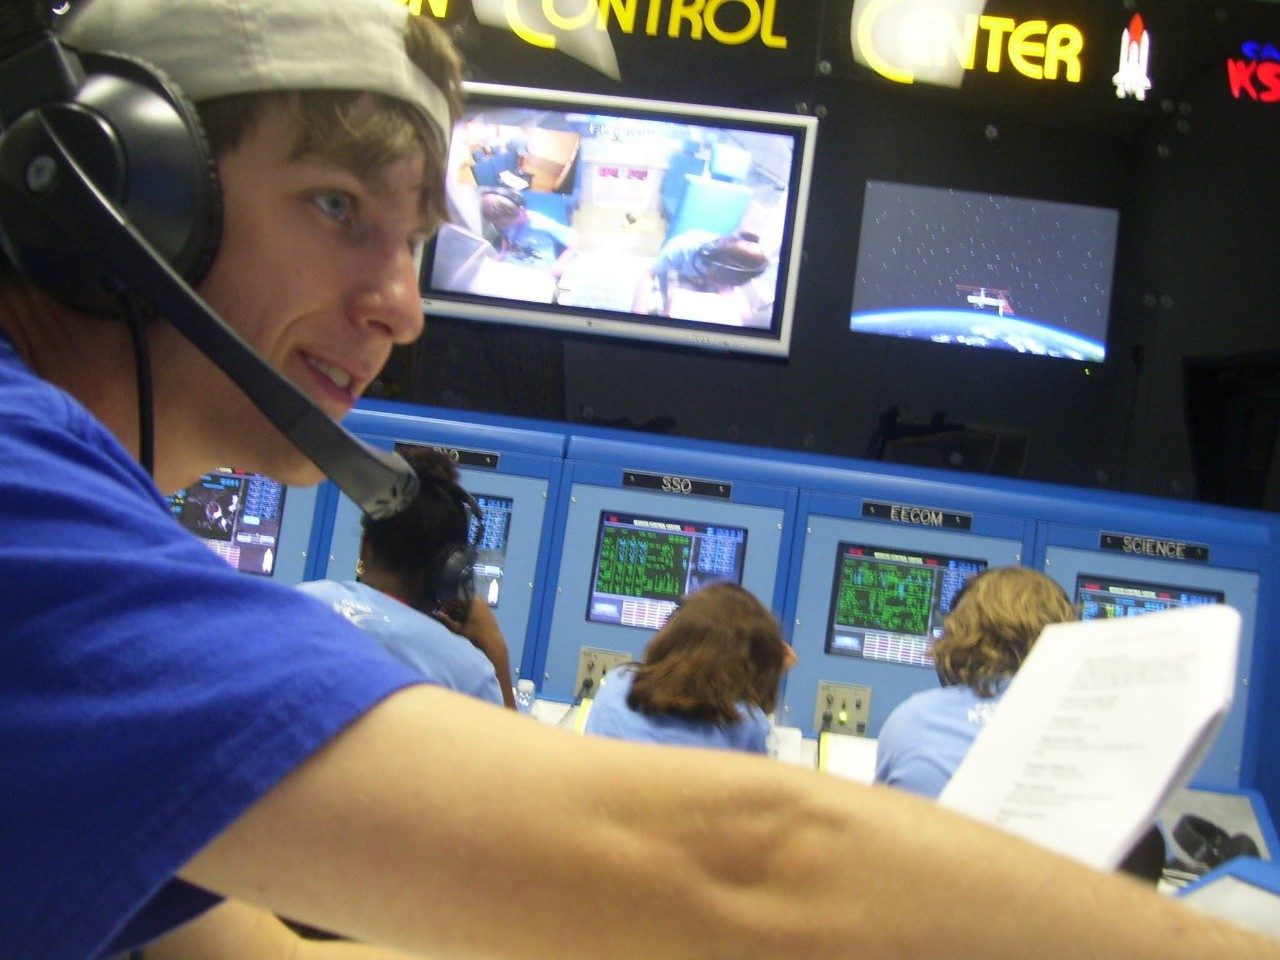 Barry running a simulated shuttle mission in 2008, located in what is today’s Lockheed Martin STAR Center, where he currently works.